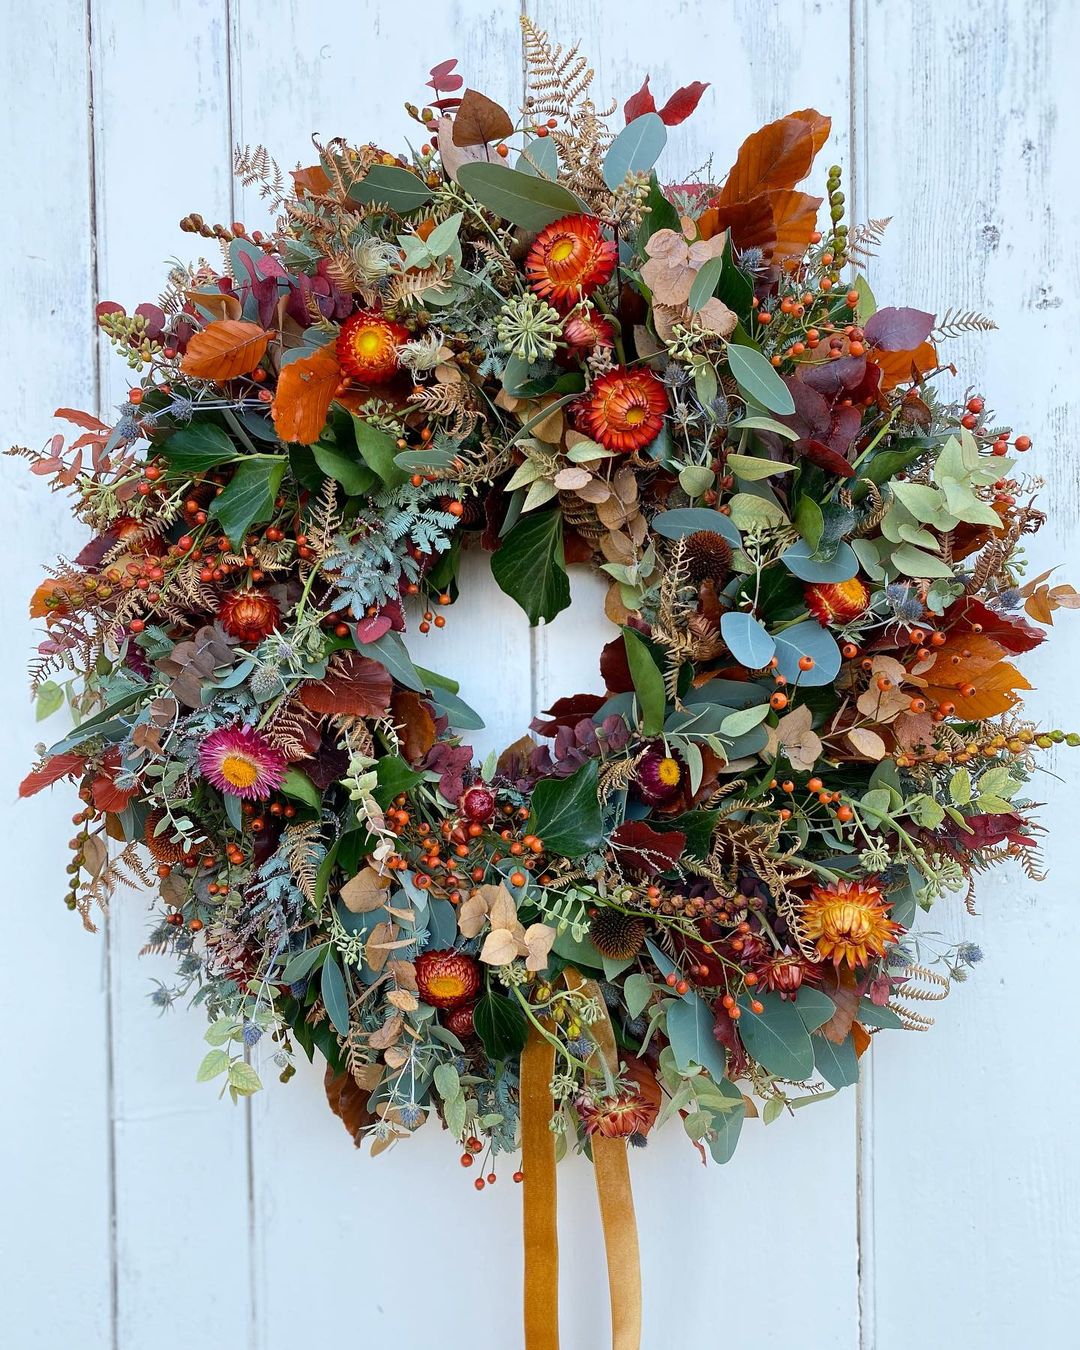 How to Make Your Own Fall Wreaths with Natural Materials and Scents